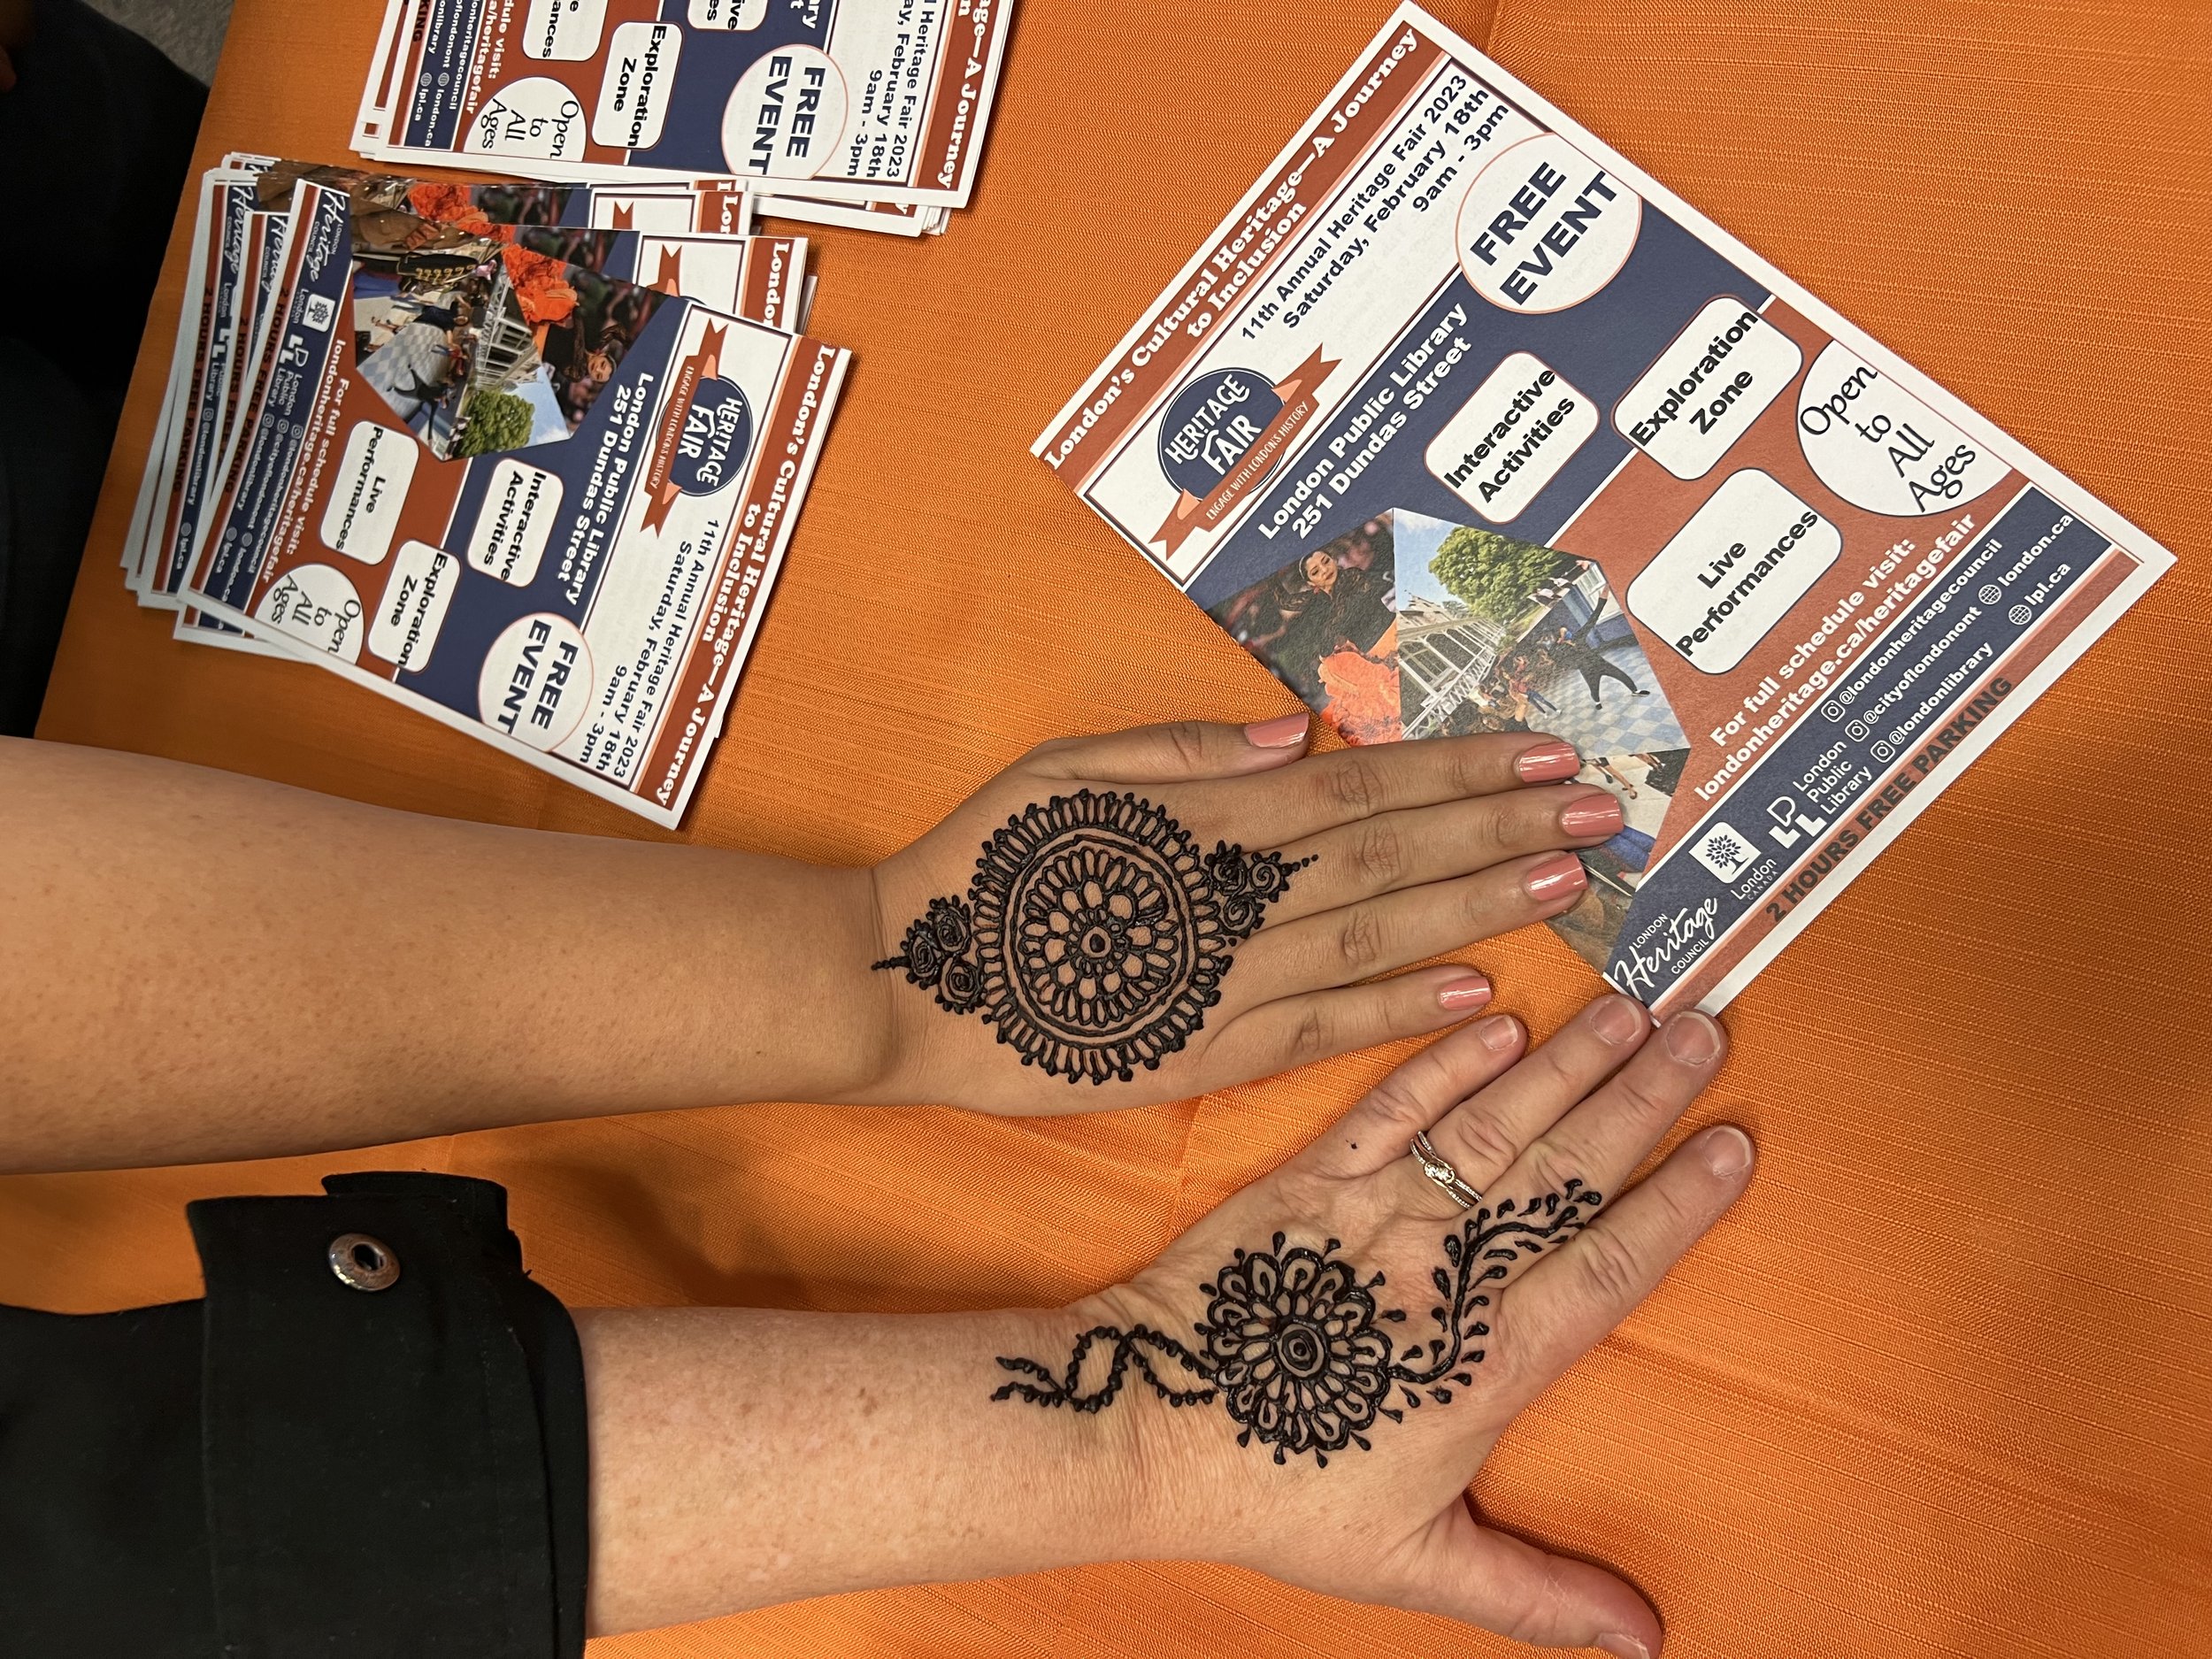 Two women's hands decorated with henna